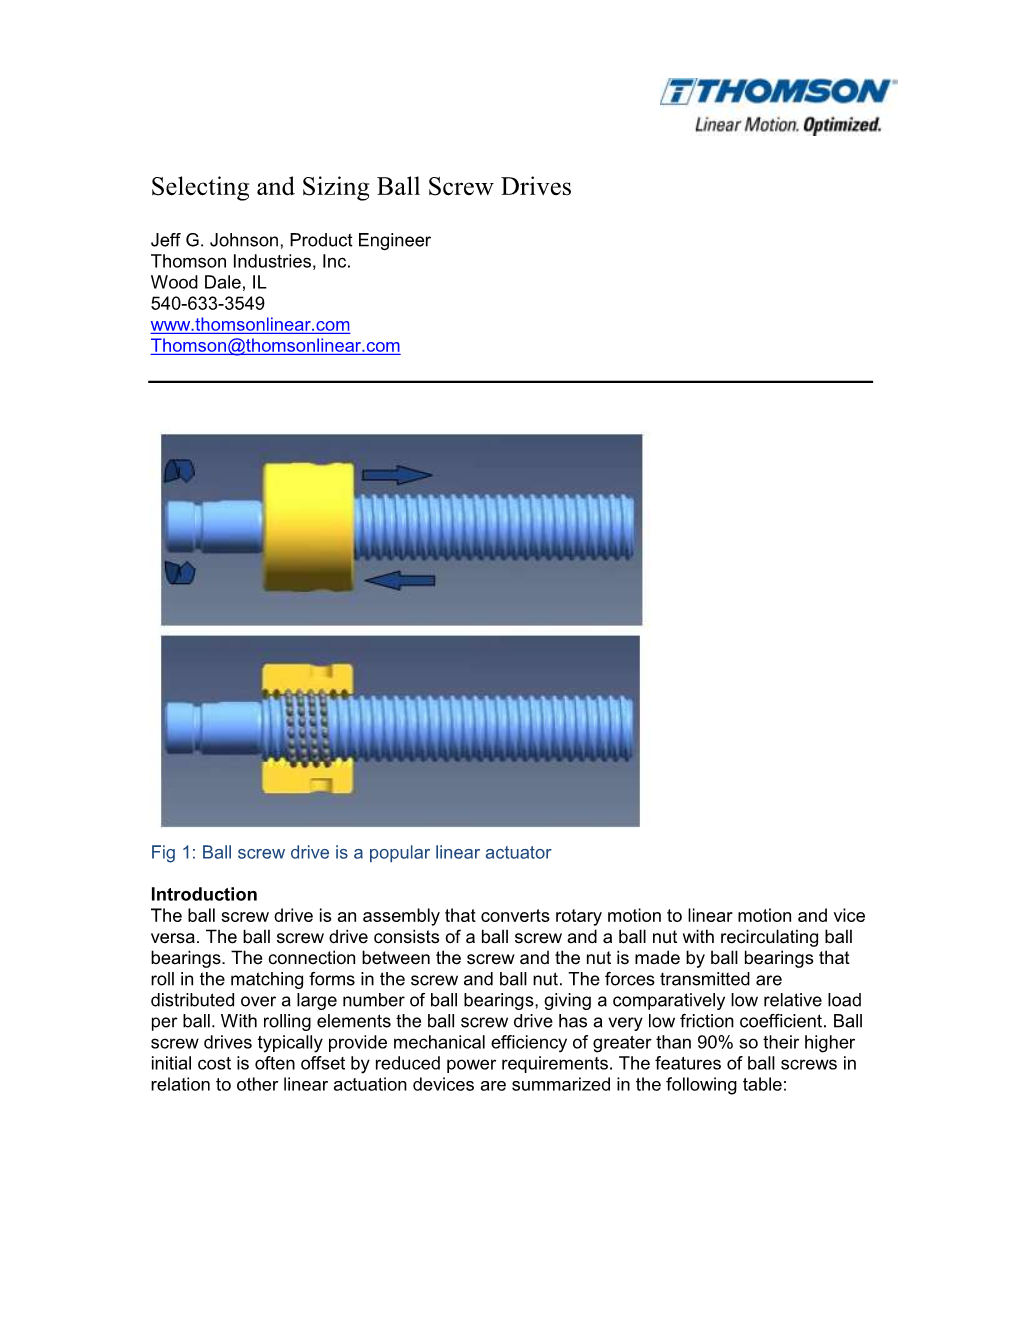 Selecting and Sizing Ball Screw Drives